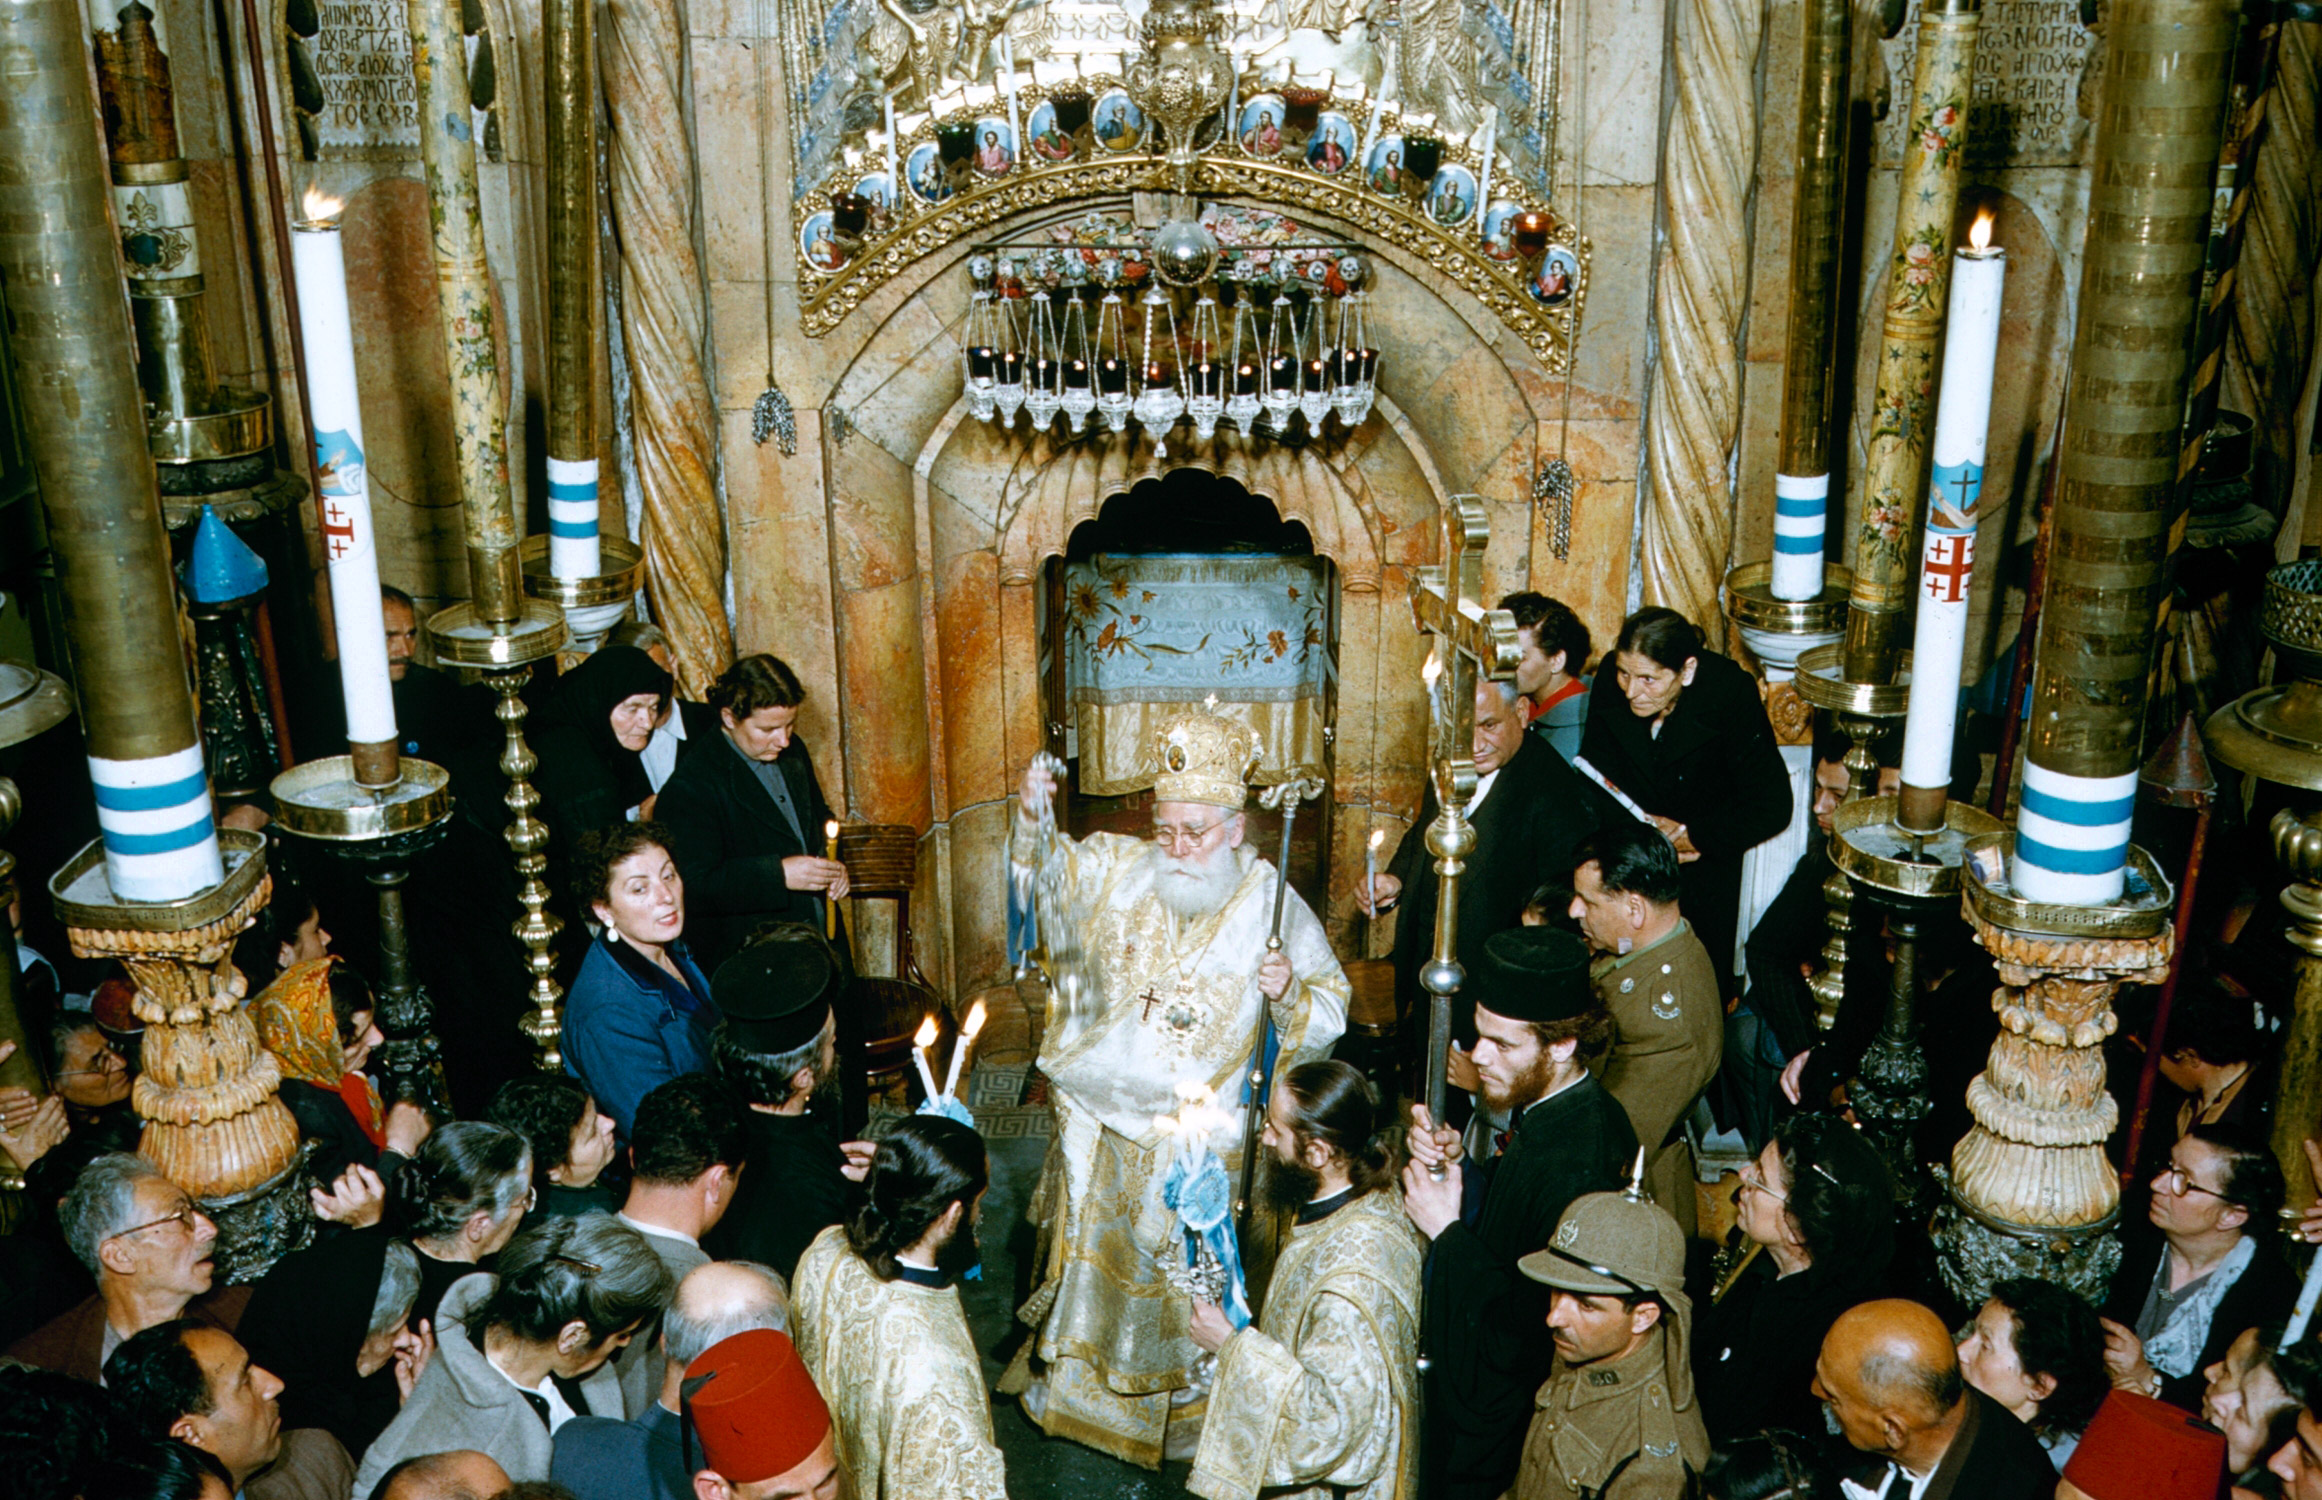 Easter in the Holy Land, 1955.